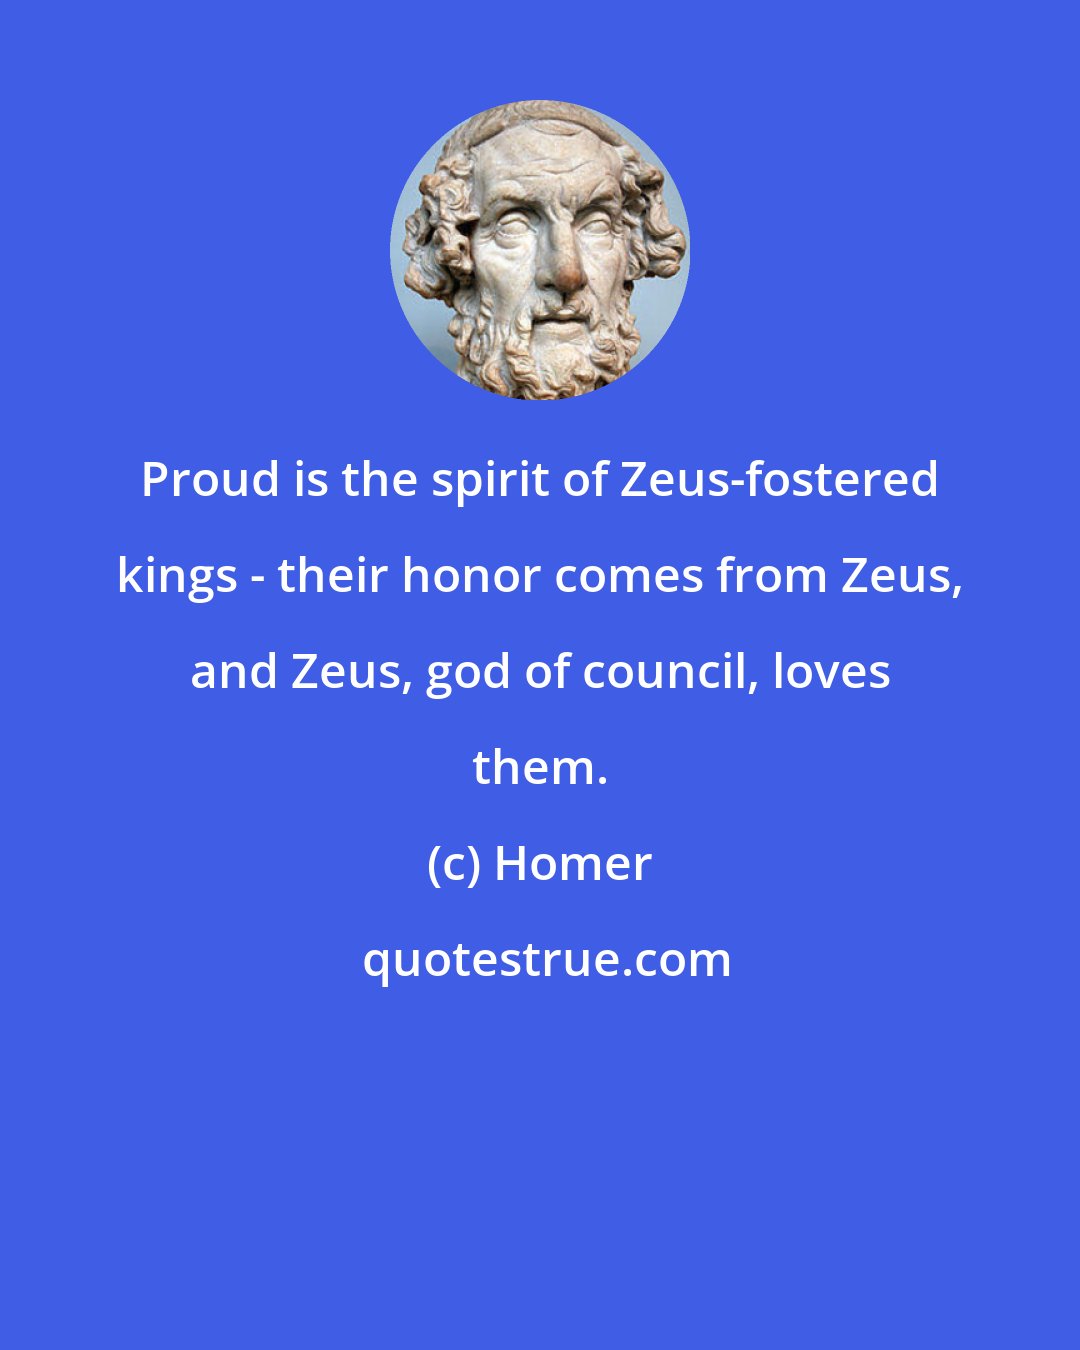 Homer: Proud is the spirit of Zeus-fostered kings - their honor comes from Zeus, and Zeus, god of council, loves them.